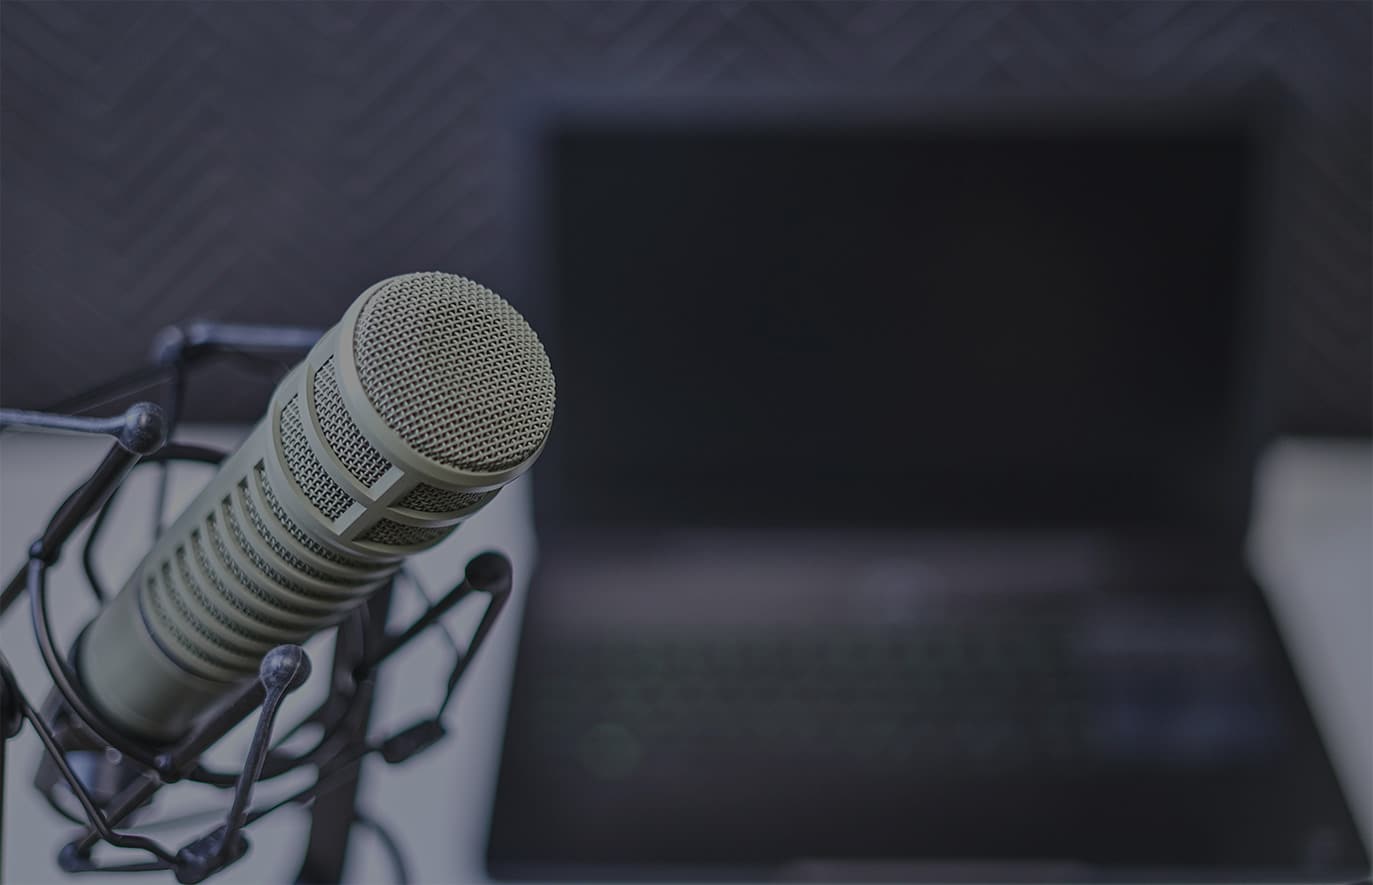 FCPA Compliance & Ethics Podcast featuring Jerry Coyne — The Use of Monitors by State Attorneys General: Ep. 2